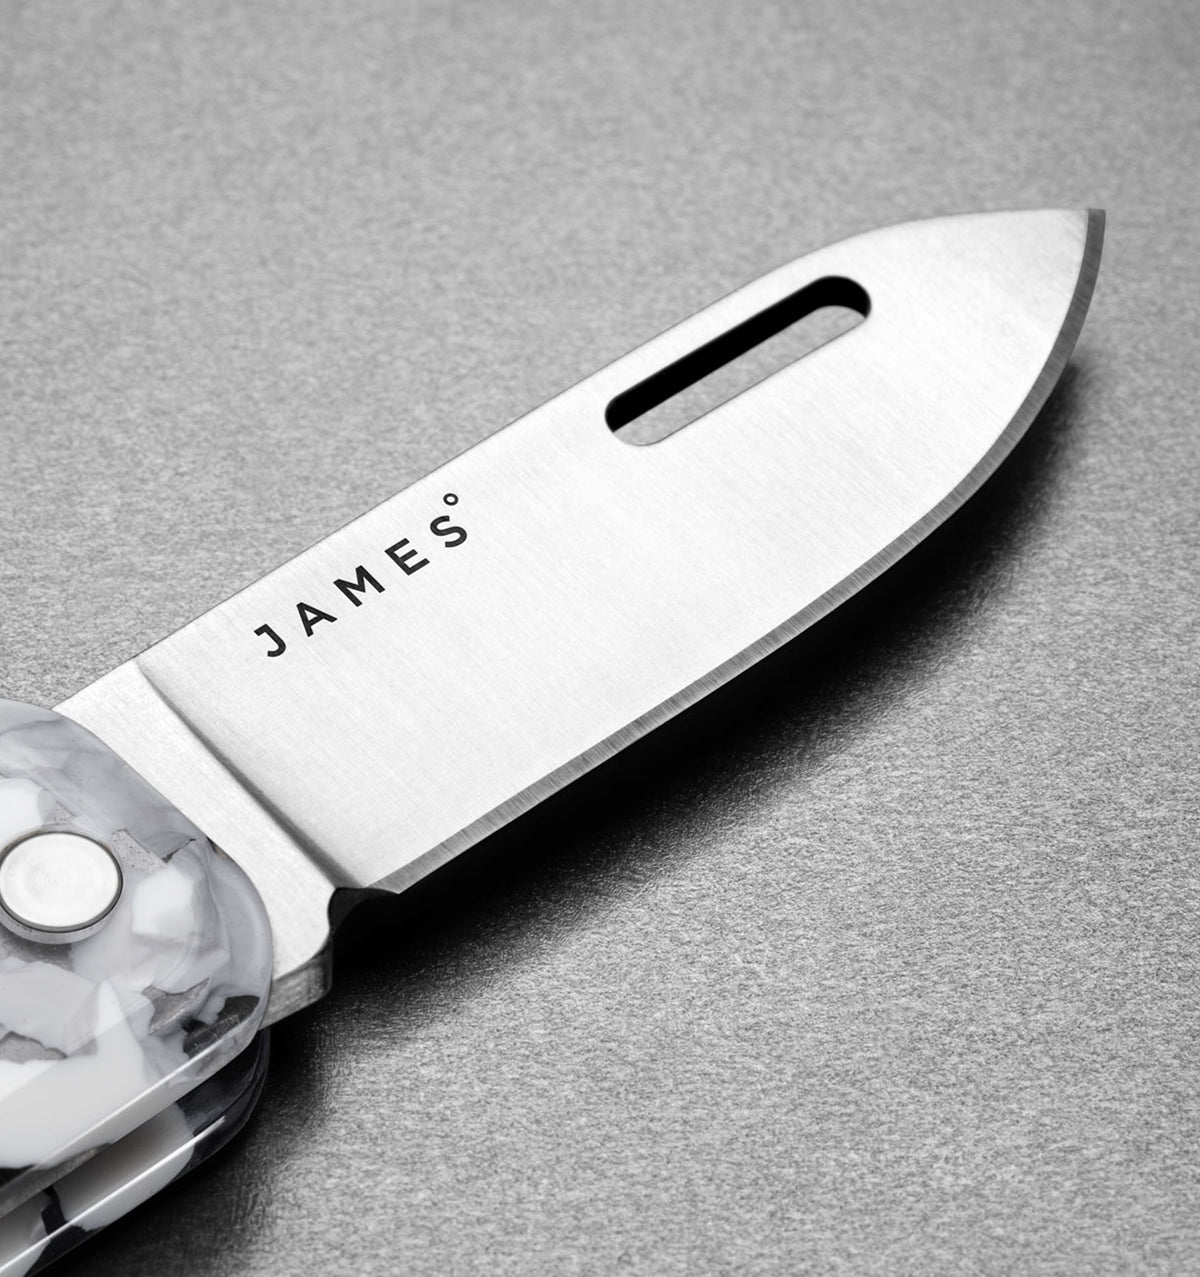 The James Brand - The Elko Utility Knife - Arctic Tortoise + Stainless